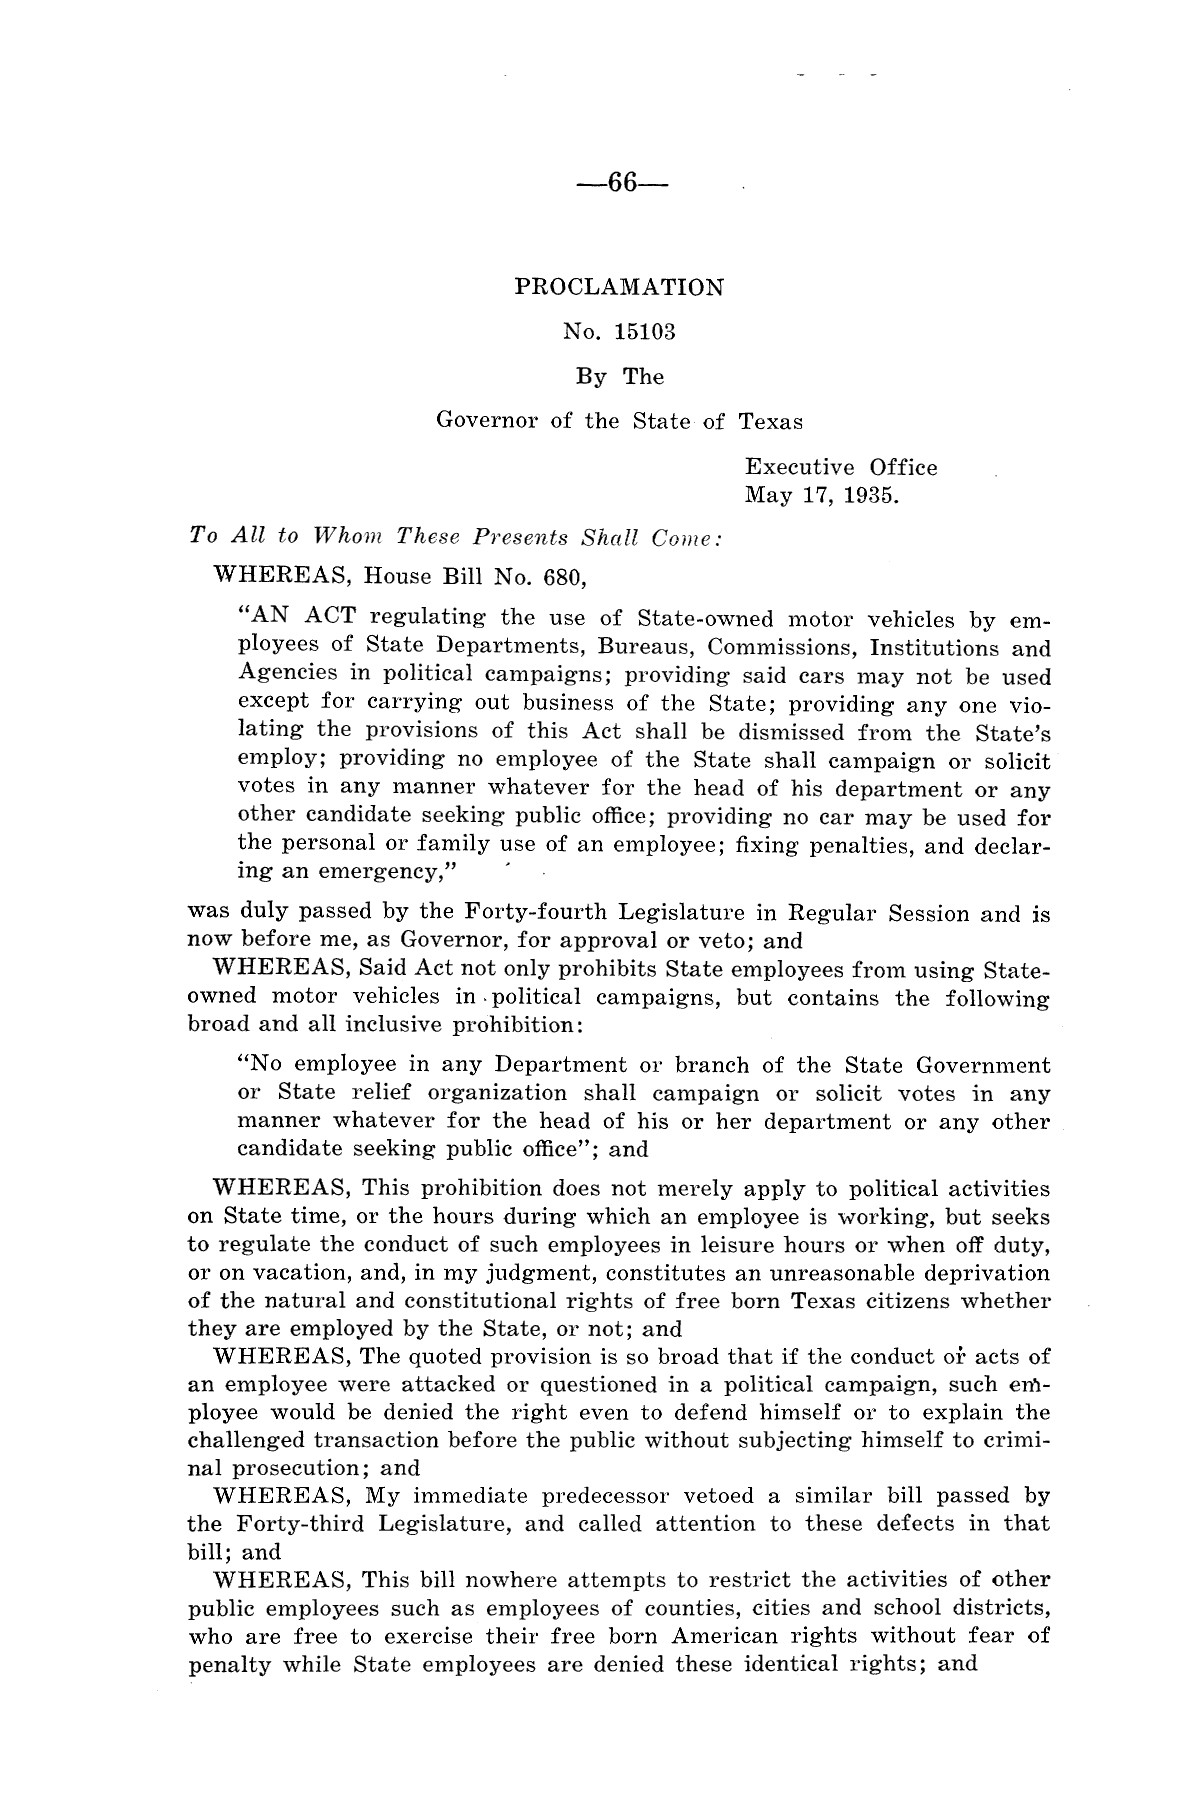 Legislative Messages of Hon. James V. Allred, Governor of Texas 1935-1939
                                                
                                                    [Sequence #]: 65 of 263
                                                